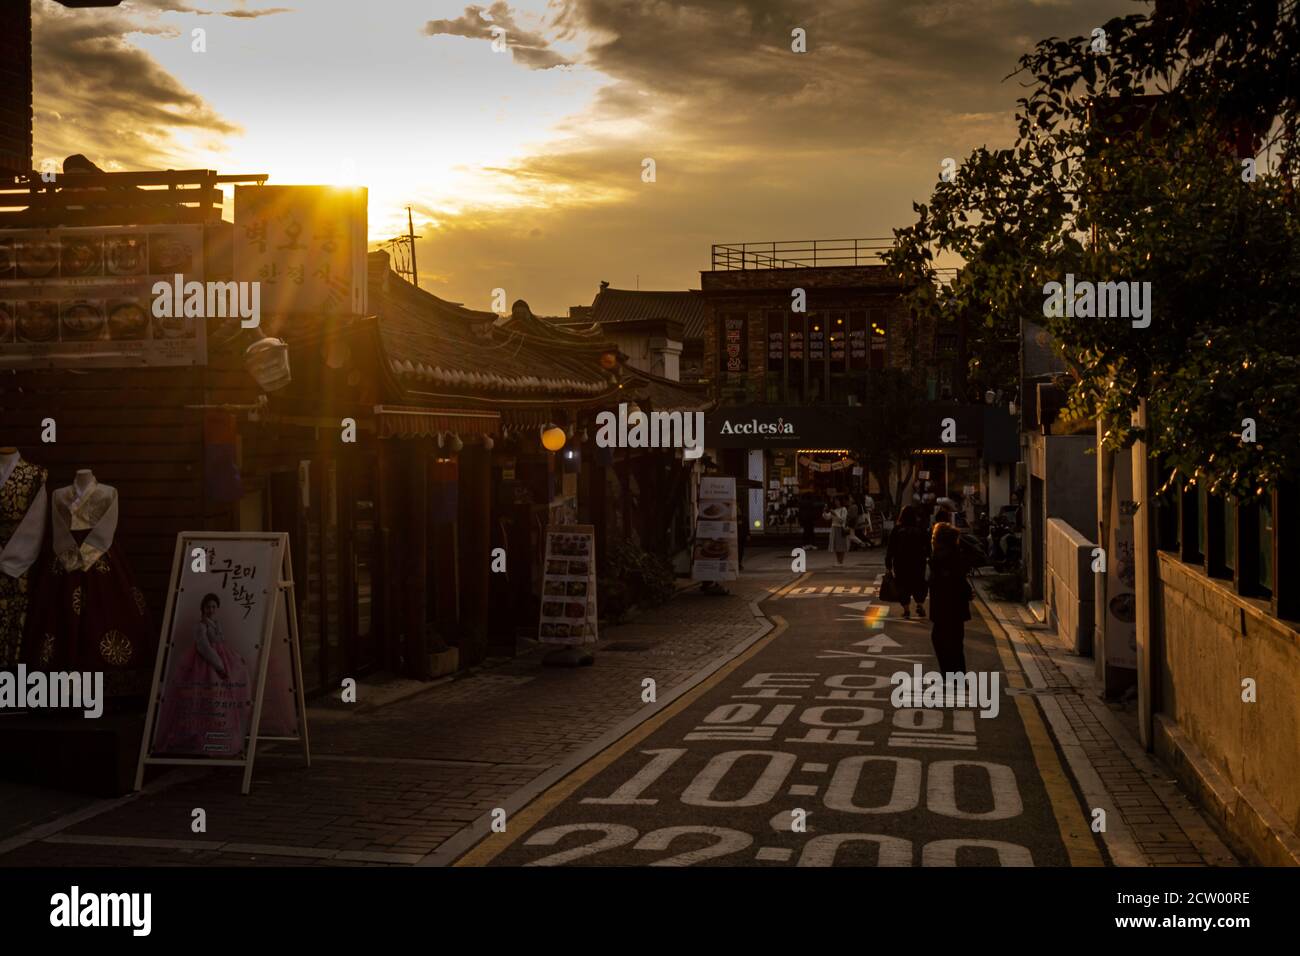 Seoul, South Korea - October 19th 2017: A small street and shops in Seoul at sunset at Bukchon Hanok Village, South Korea Stock Photo